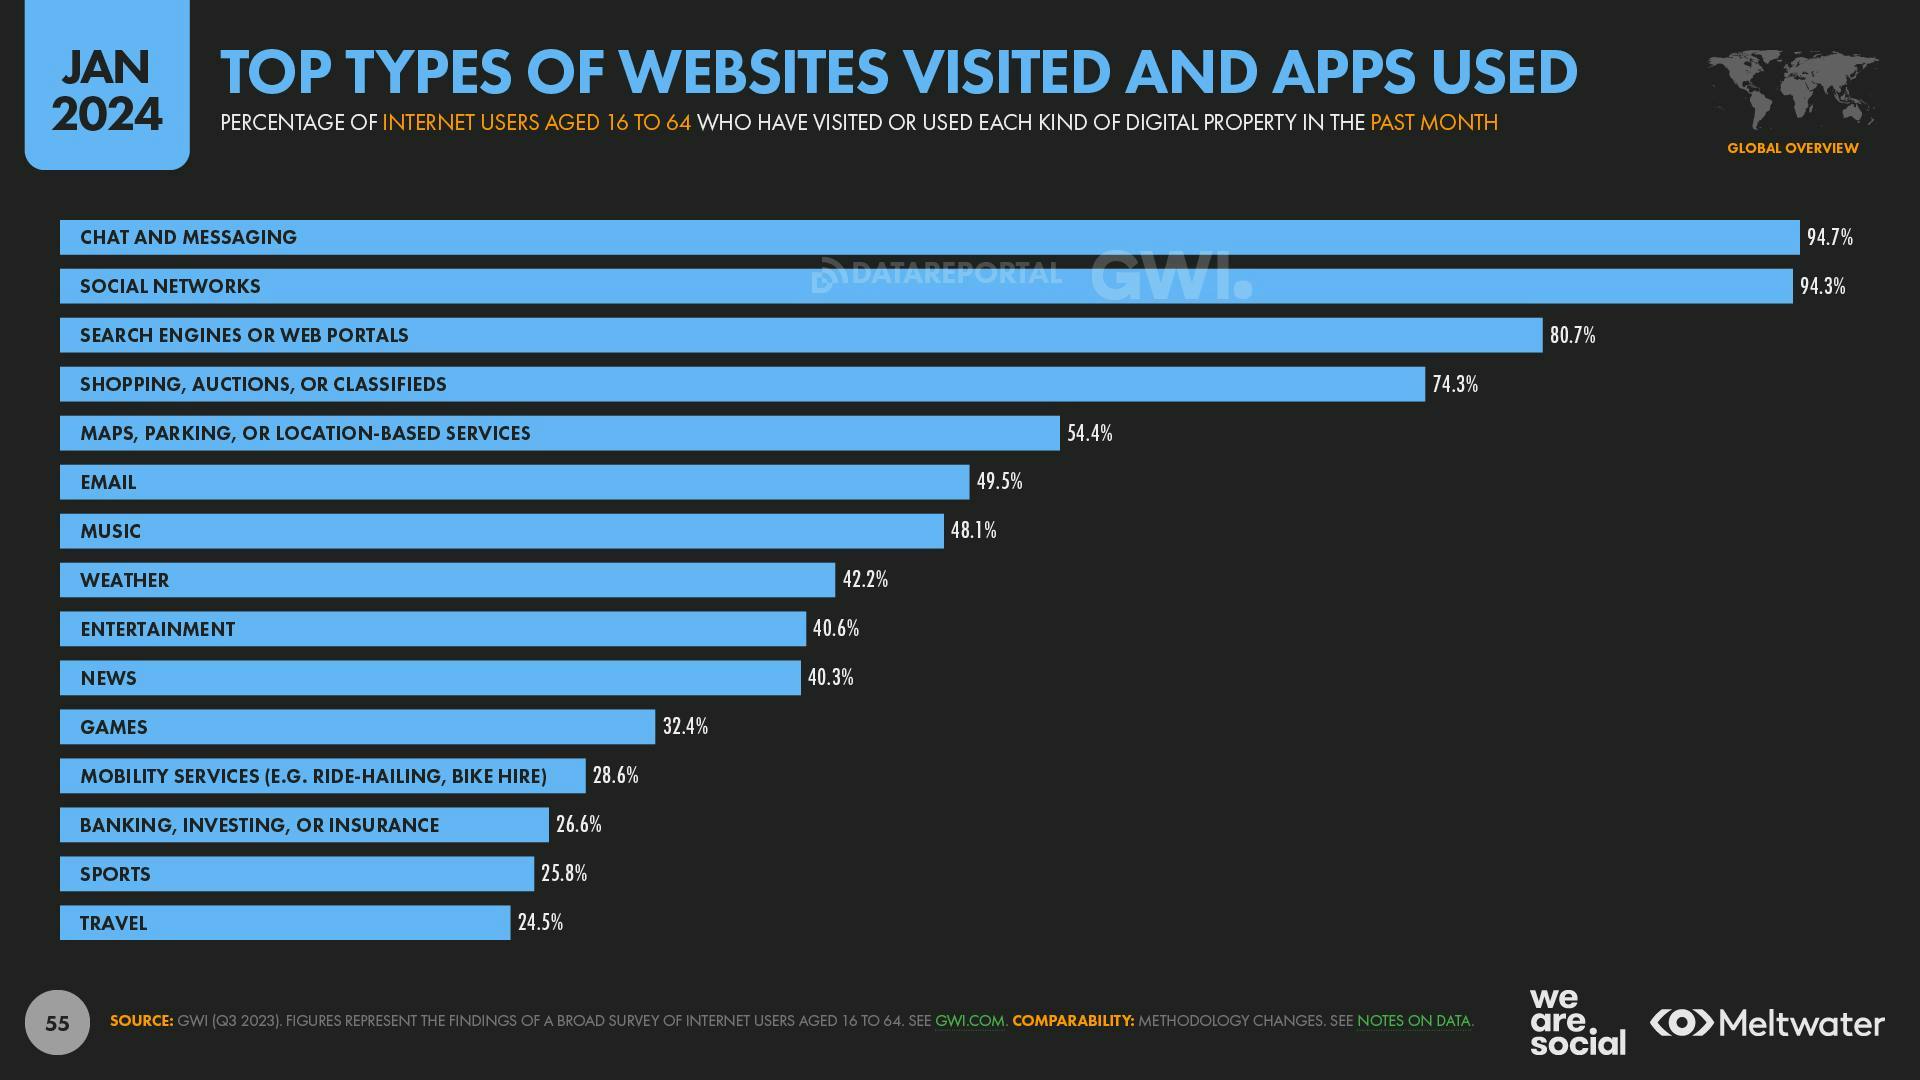 Top types of websites visited and apps used